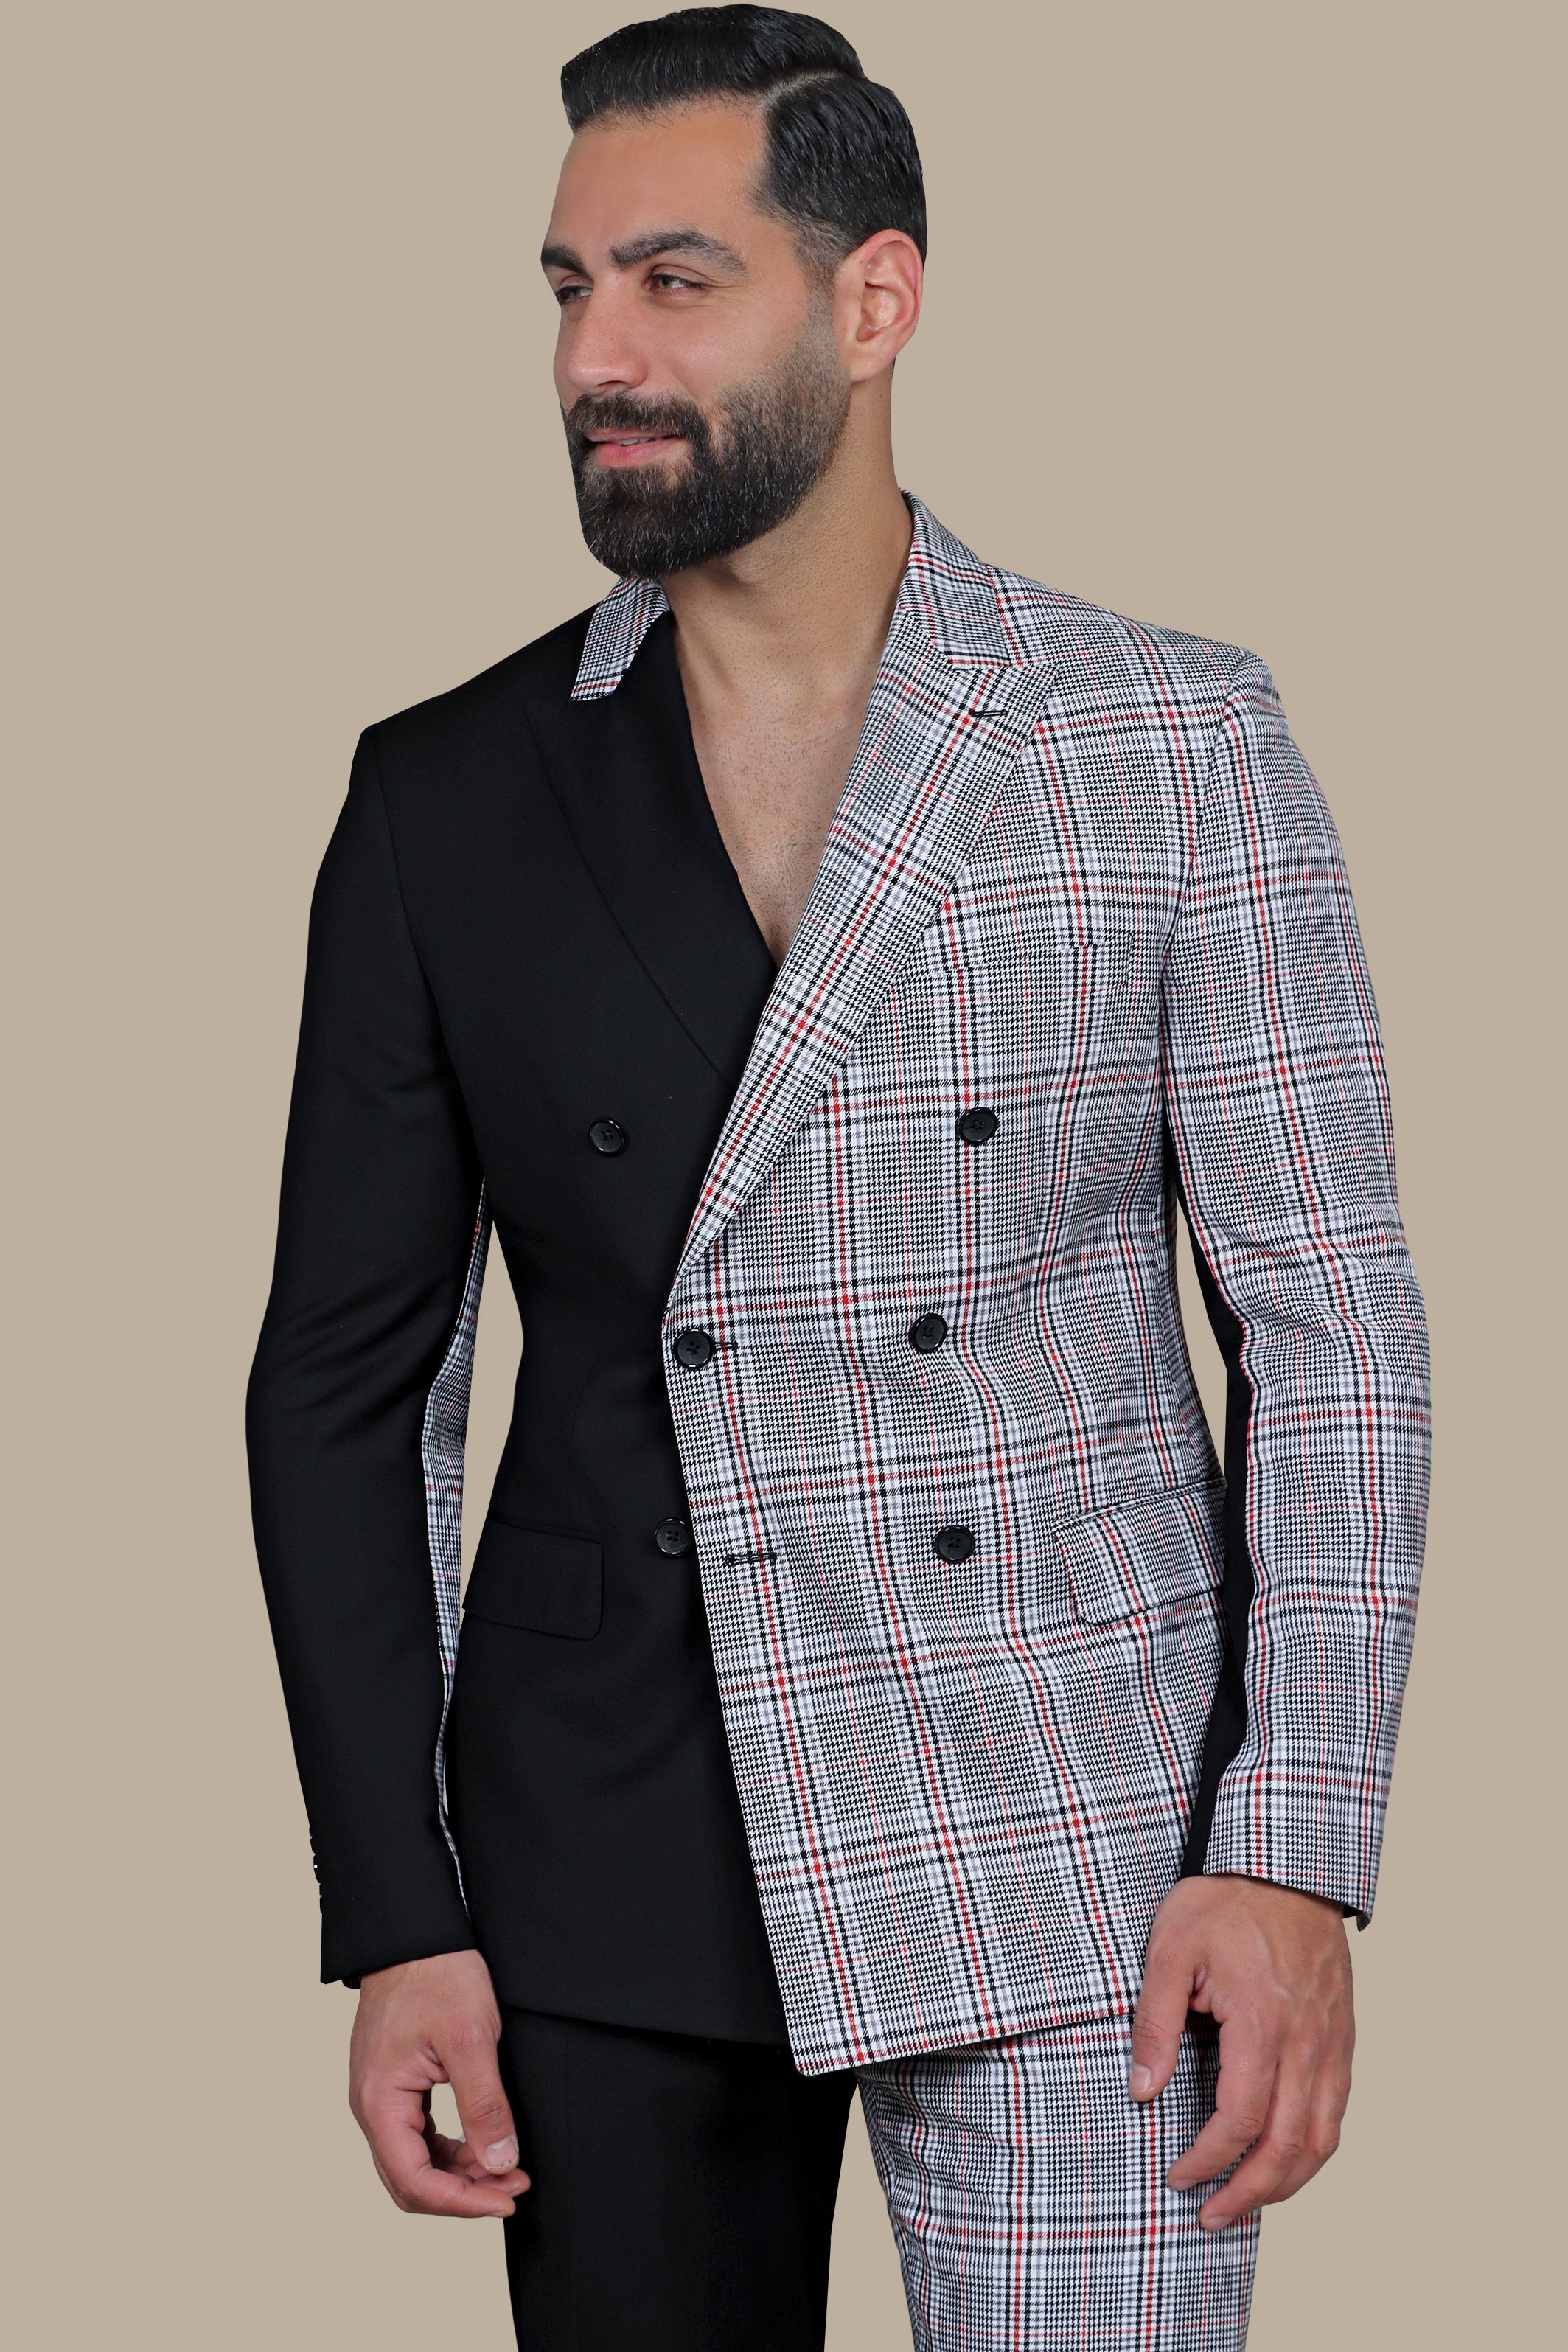 Split Symmetry: The Double-Breasted Suit FV Special Collection